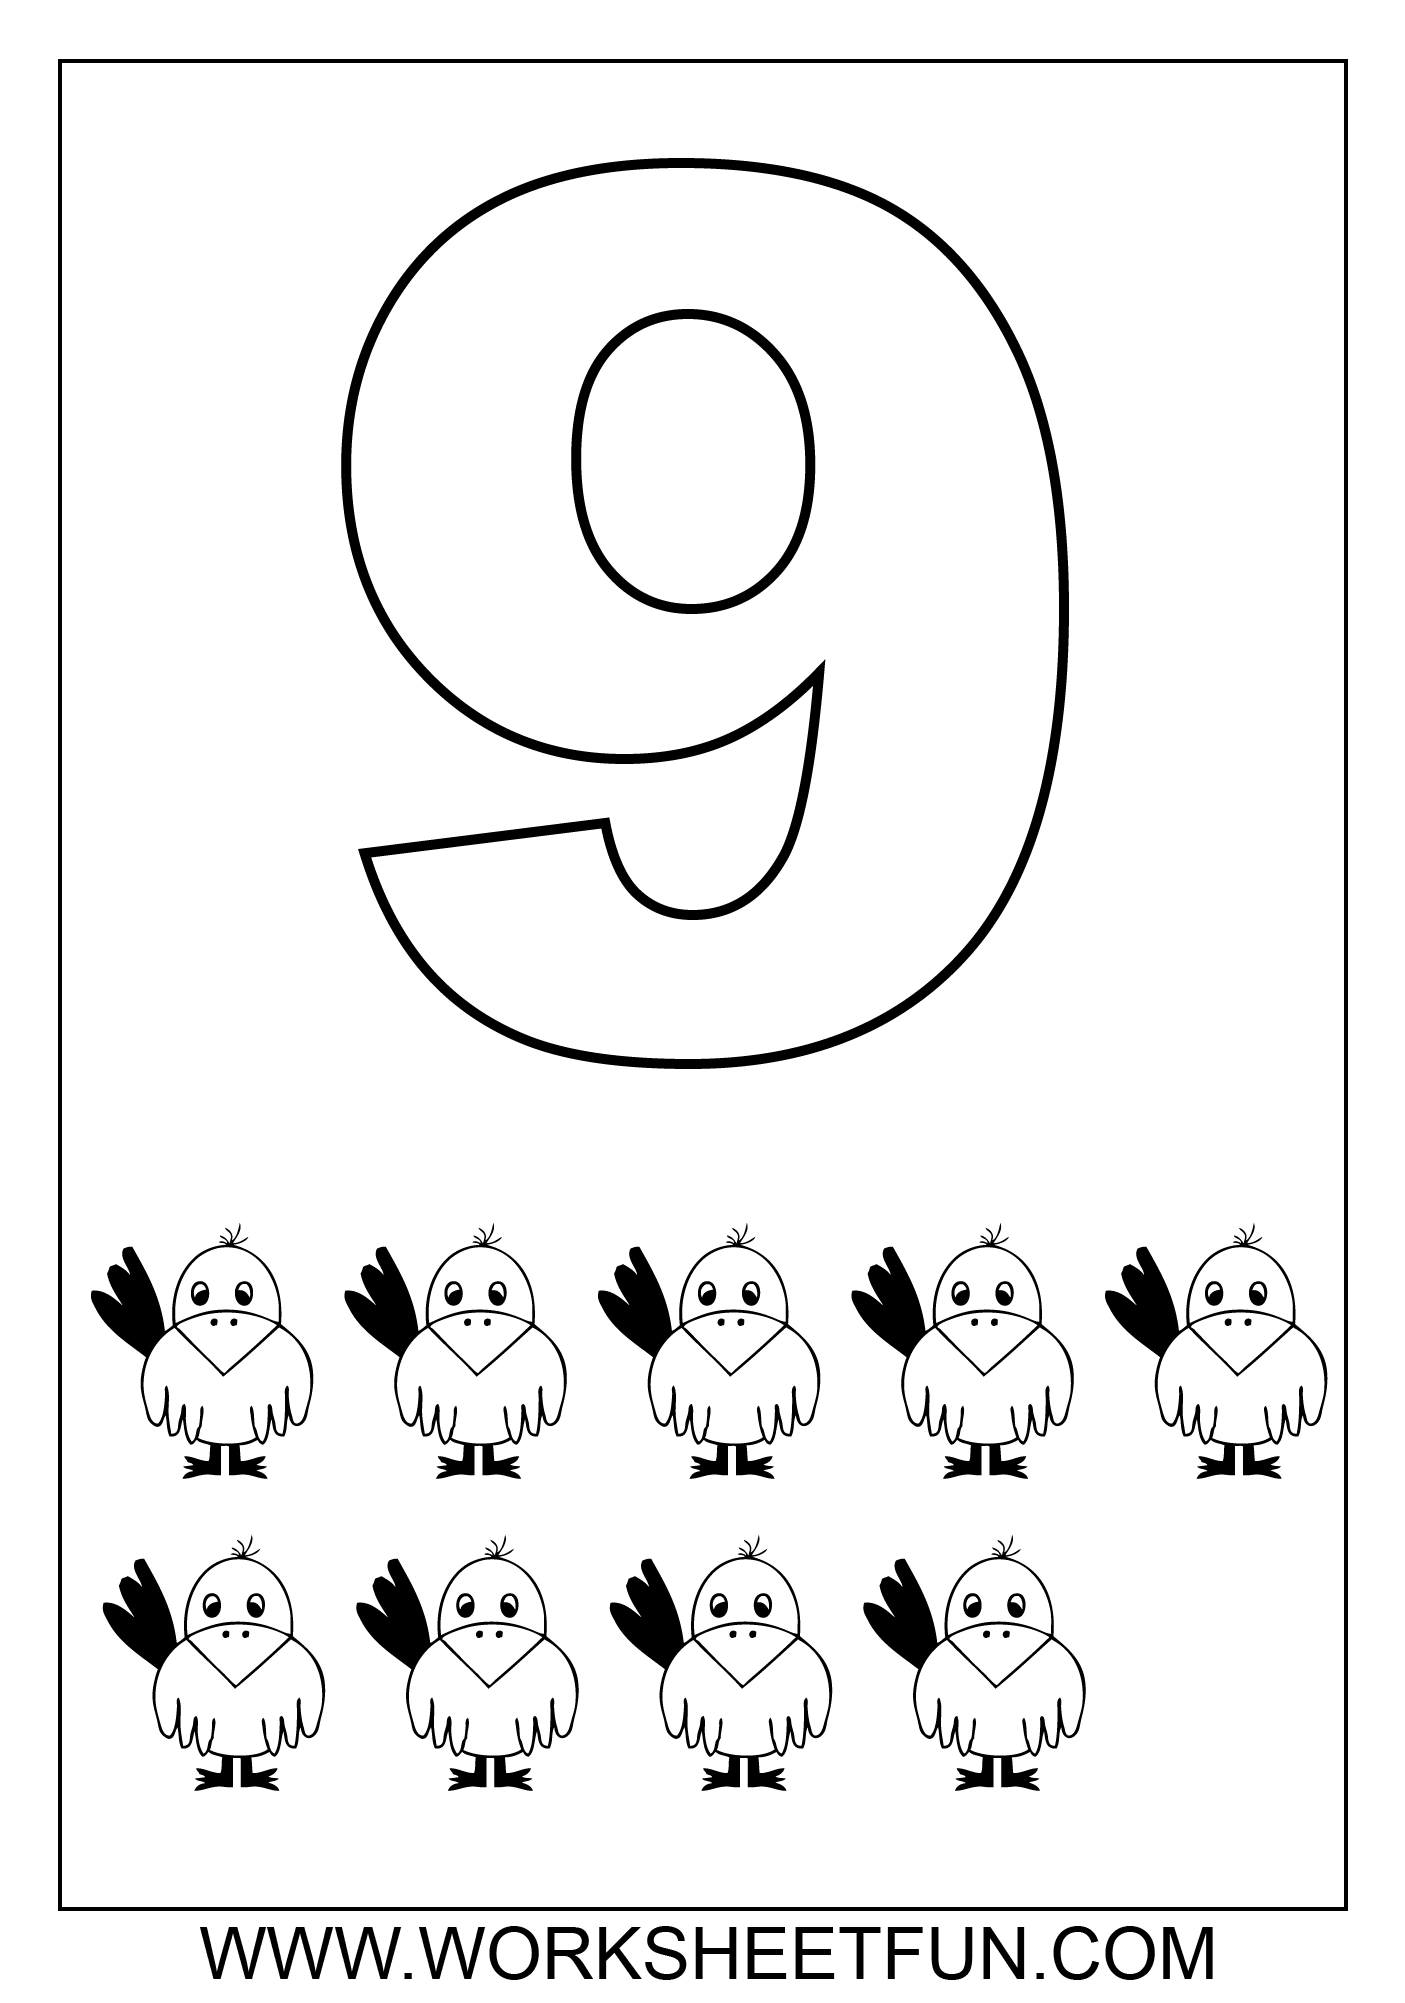 Worksheets Number 9 Coloring Page